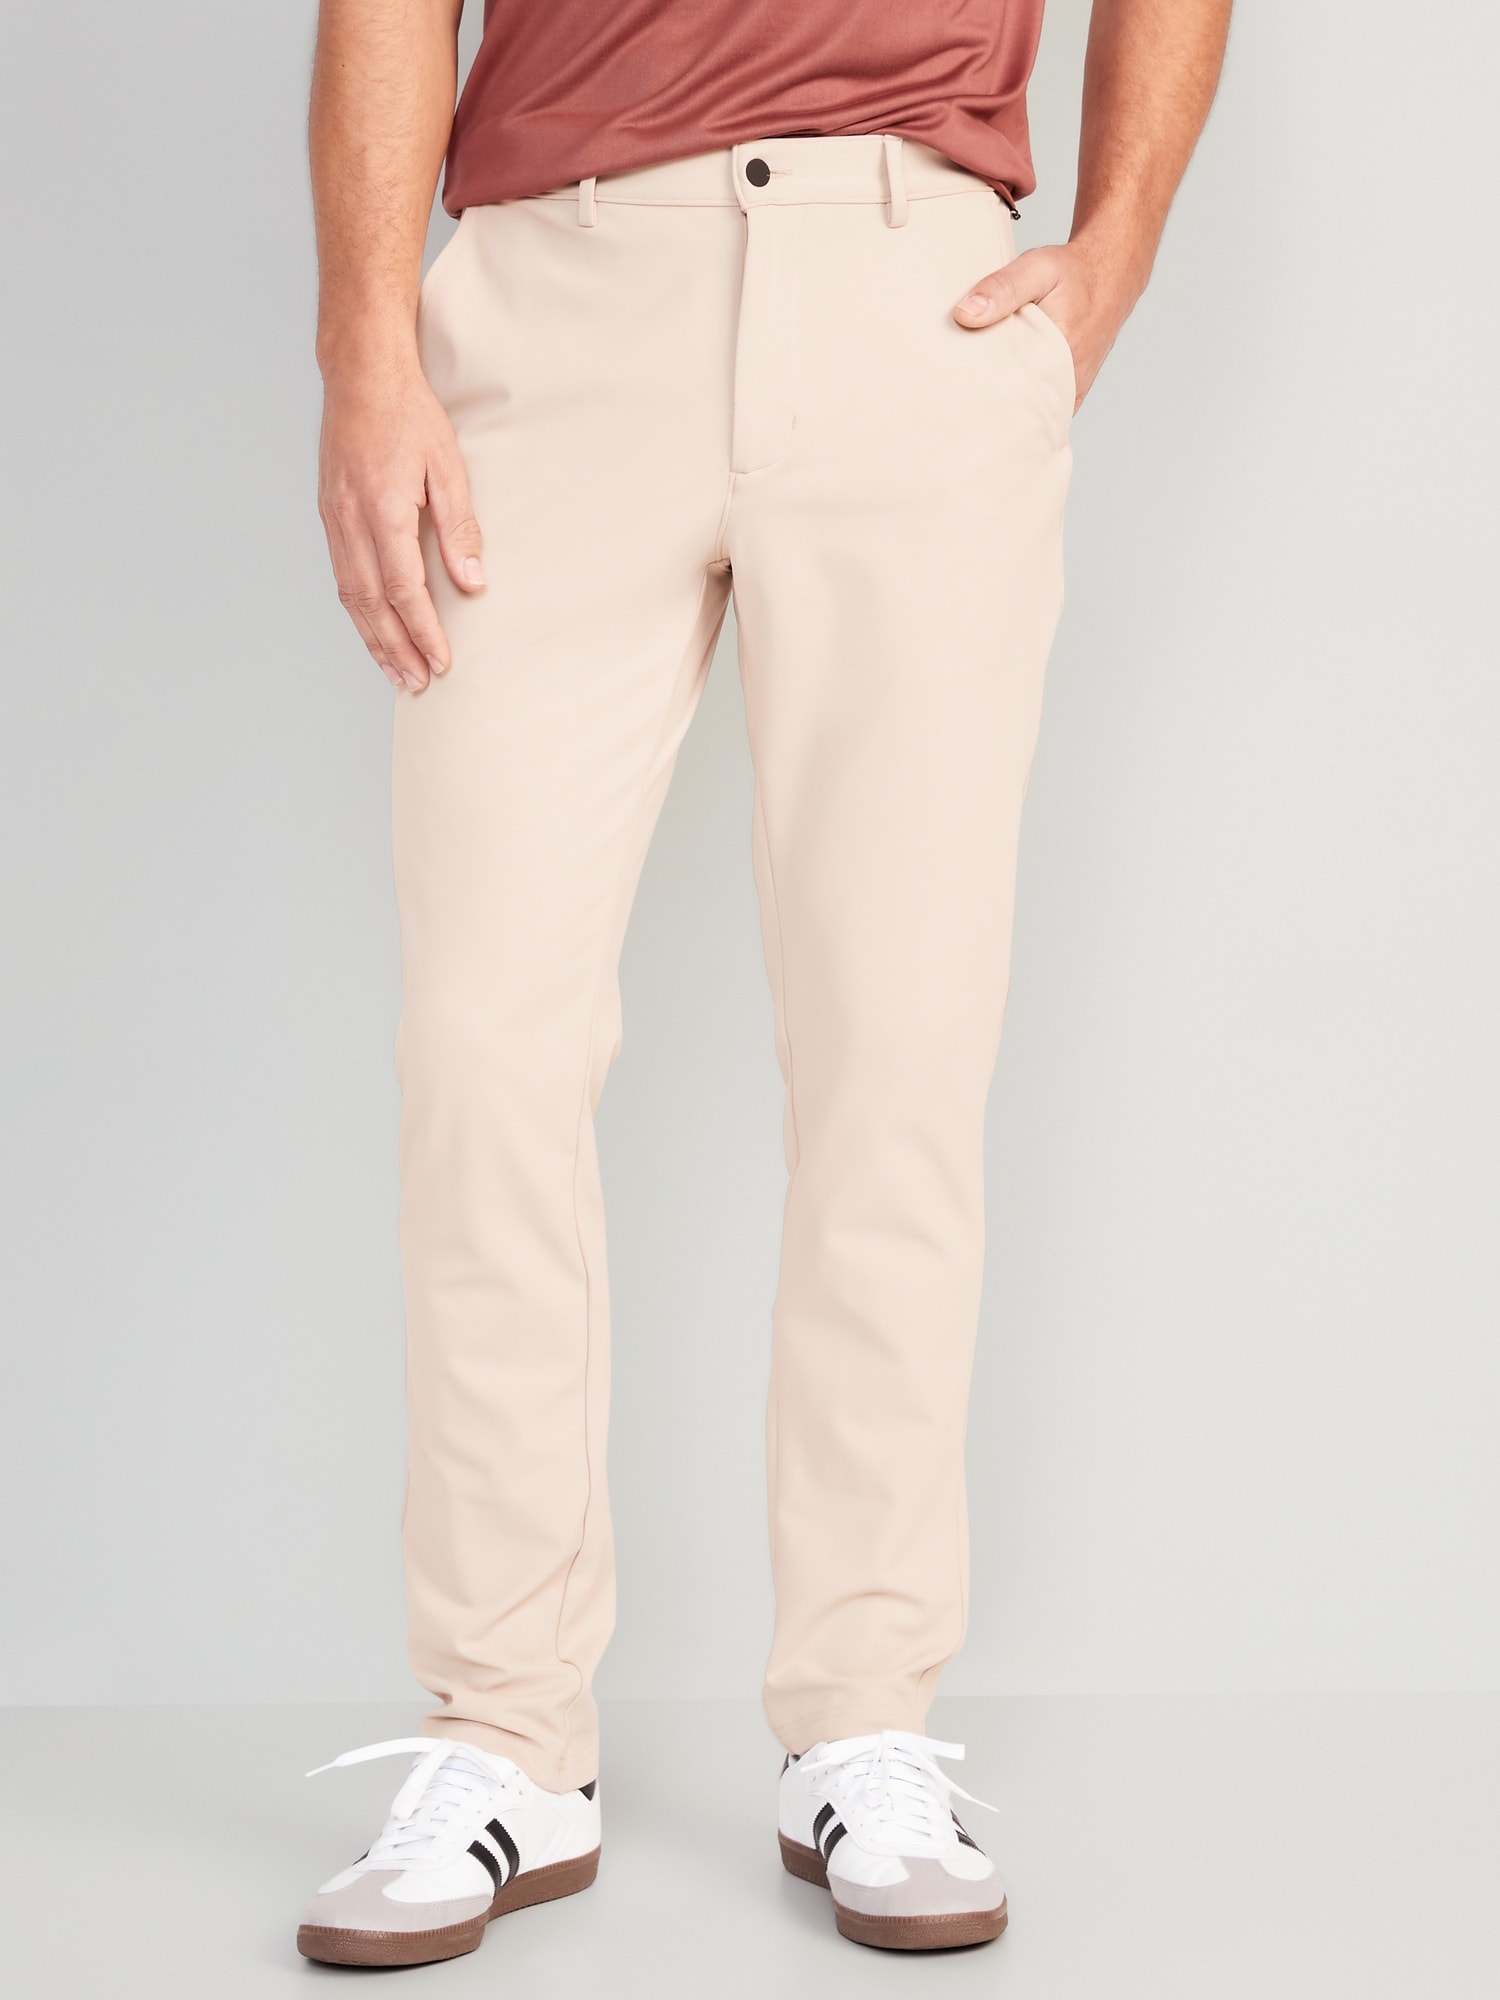 Old Navy Slim PowerSoft Go-Dry Chino Pants for Men beige. 1